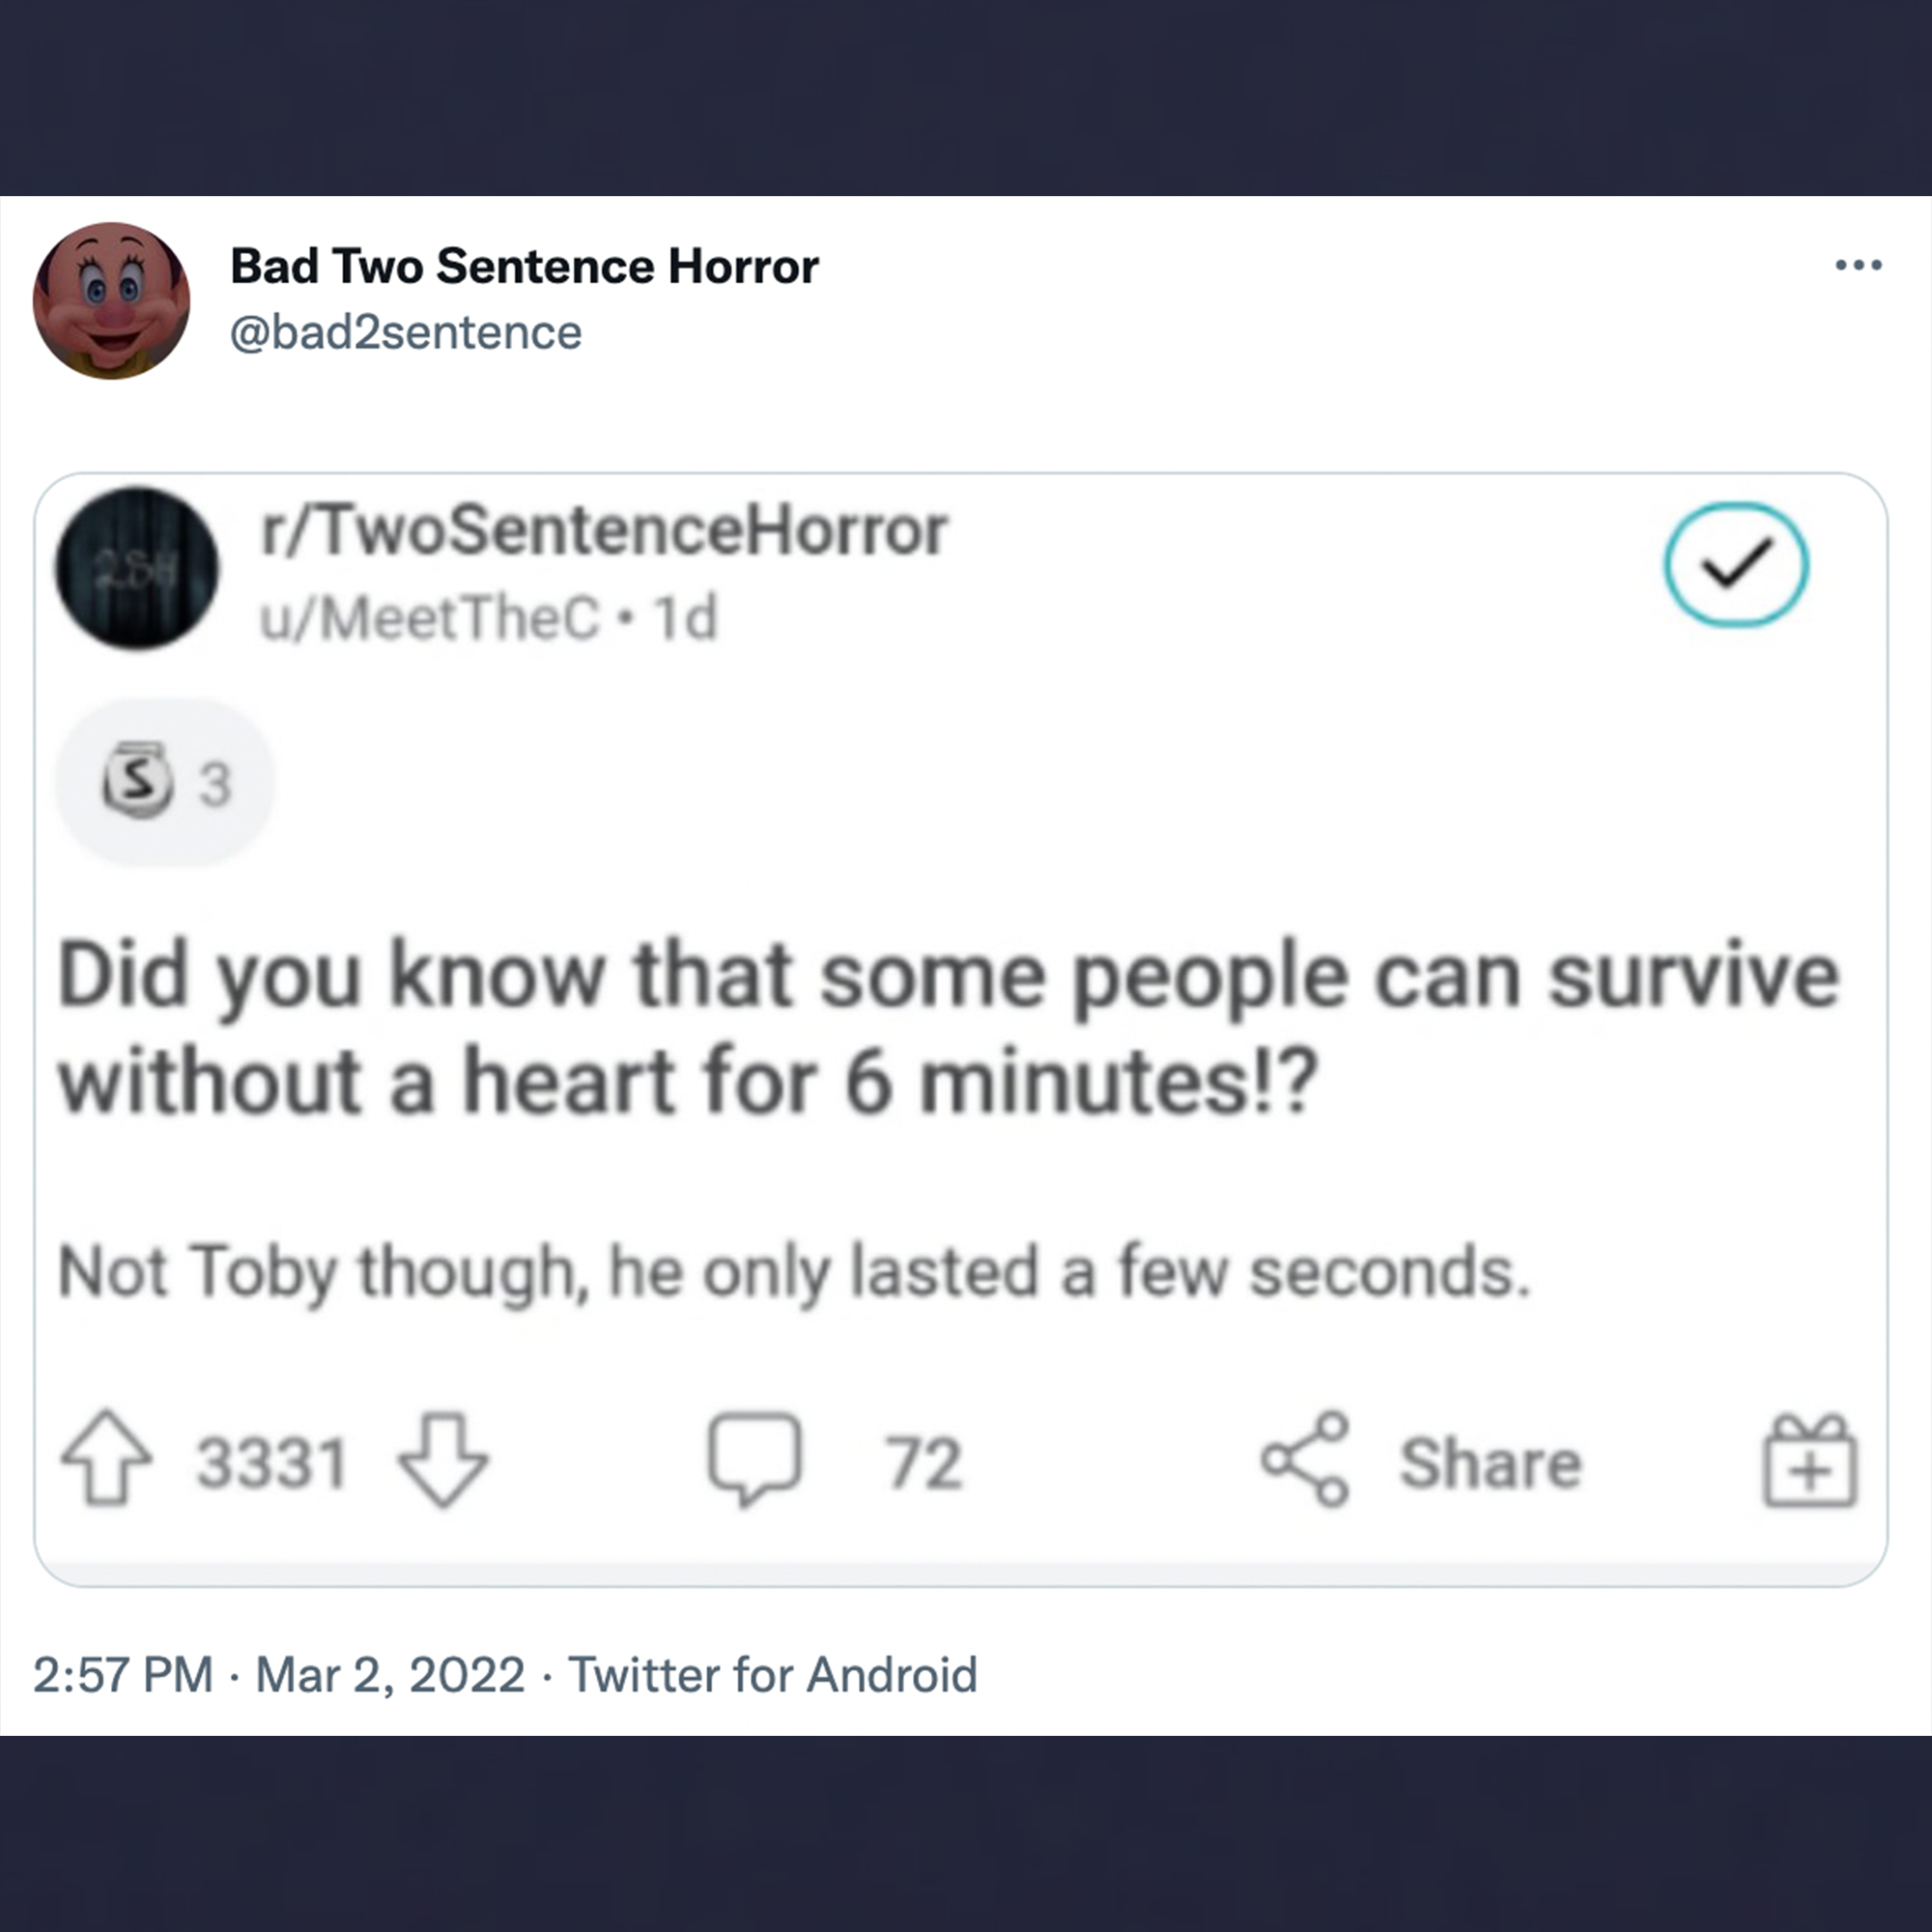 funny tweets - software - Bad Two Sentence Horror rTwoSentenceHorror uMeet TheC.10 3 Did you know that some people can survive without a heart for 6 minutes!? Not Toby though, he only lasted a few seconds. 3331 72 . . Twitter for Android